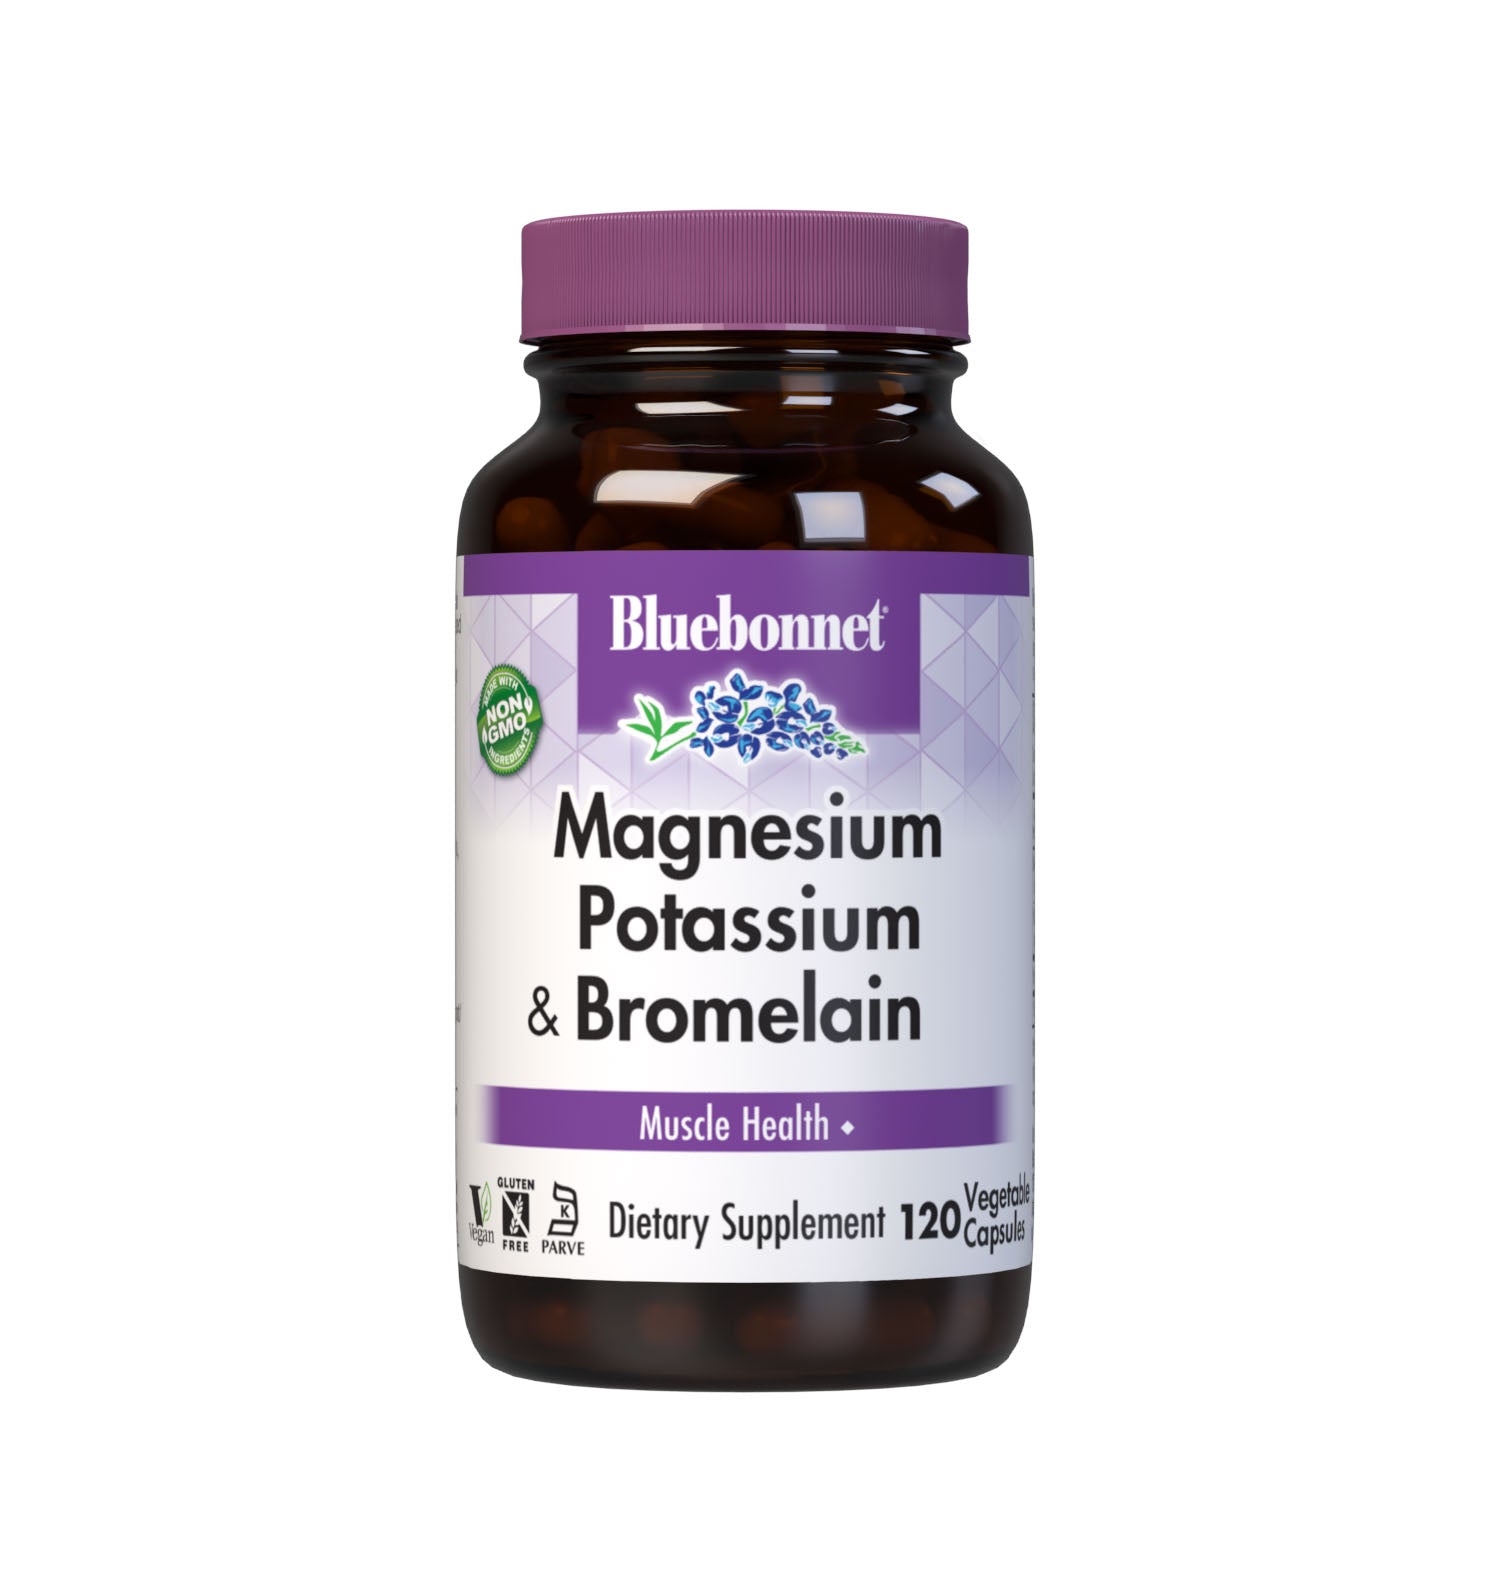 Bluebonnet's Magnesium Potassium & Bromelain 120 Vegetable Capsules are formulated with fully reacted magnesium and potassium aspartate with bromelain (2000 GDU/gram) from fresh pineapples to help support muscle health. #size_120 count